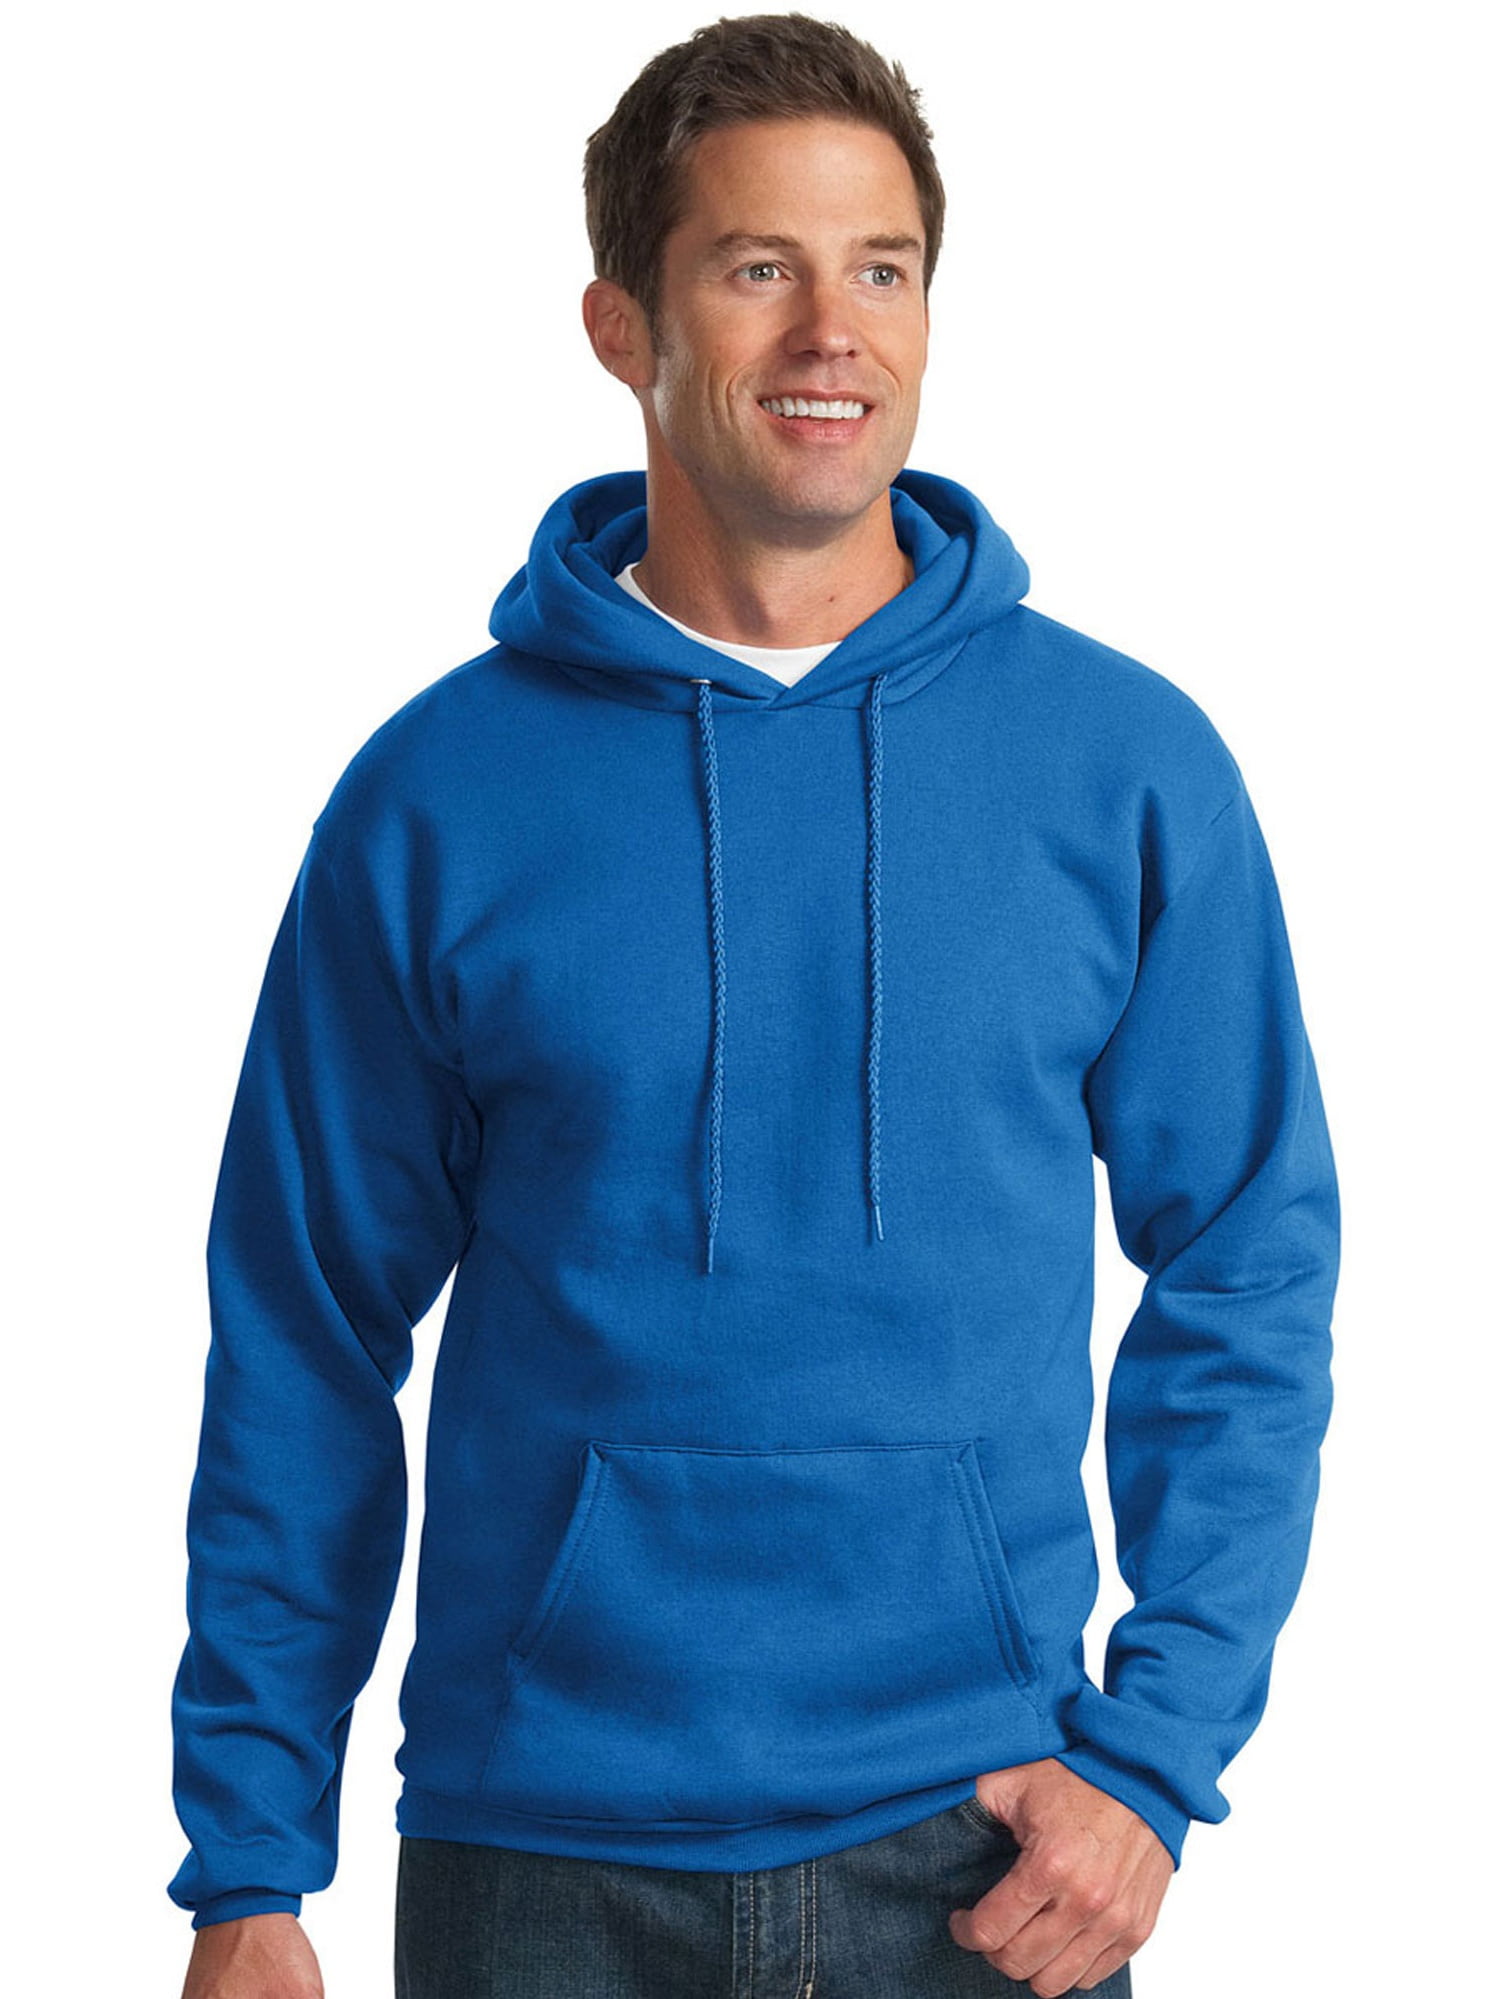 Port & Company - Port & Company Essential Fleece Pullover Hooded ...